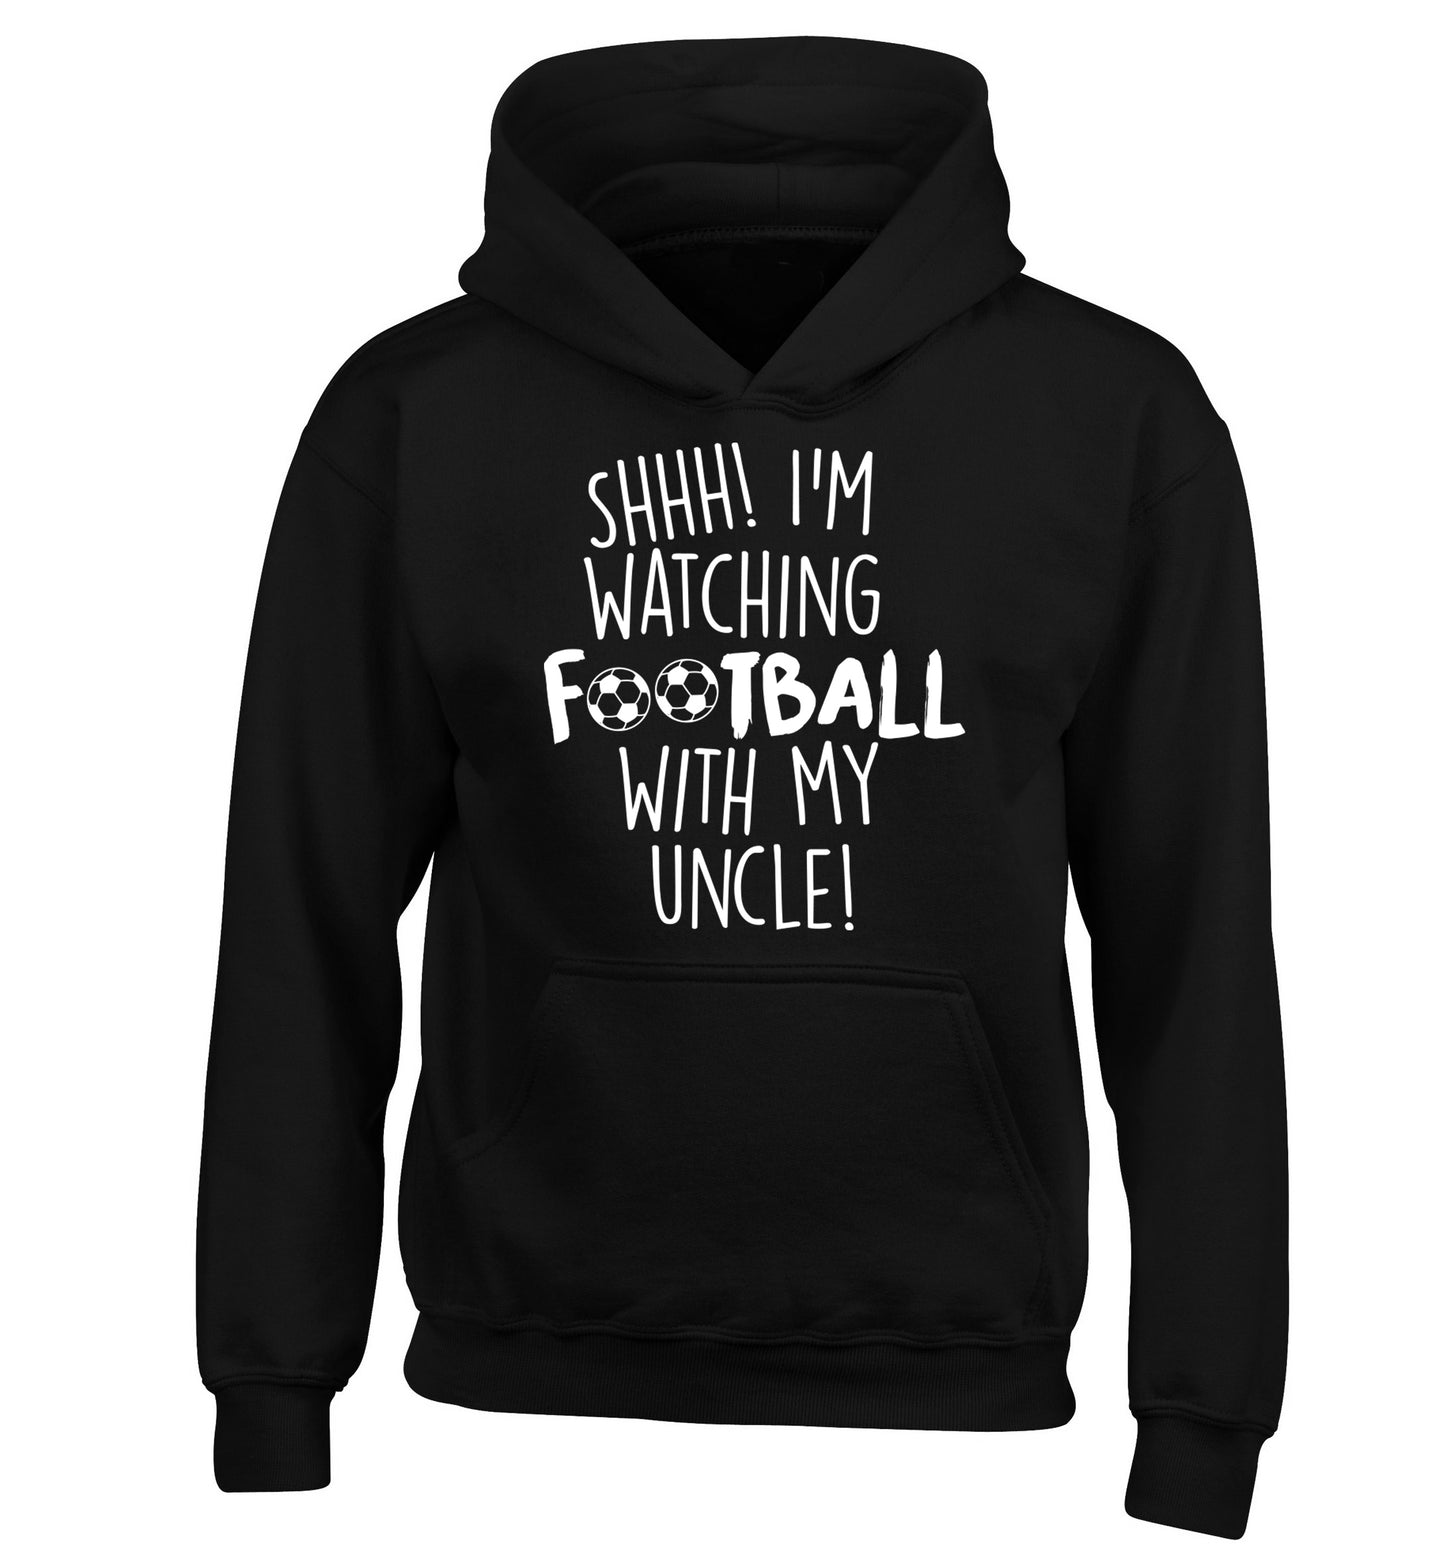 Shhh I'm watching football with my uncle children's black hoodie 12-14 Years